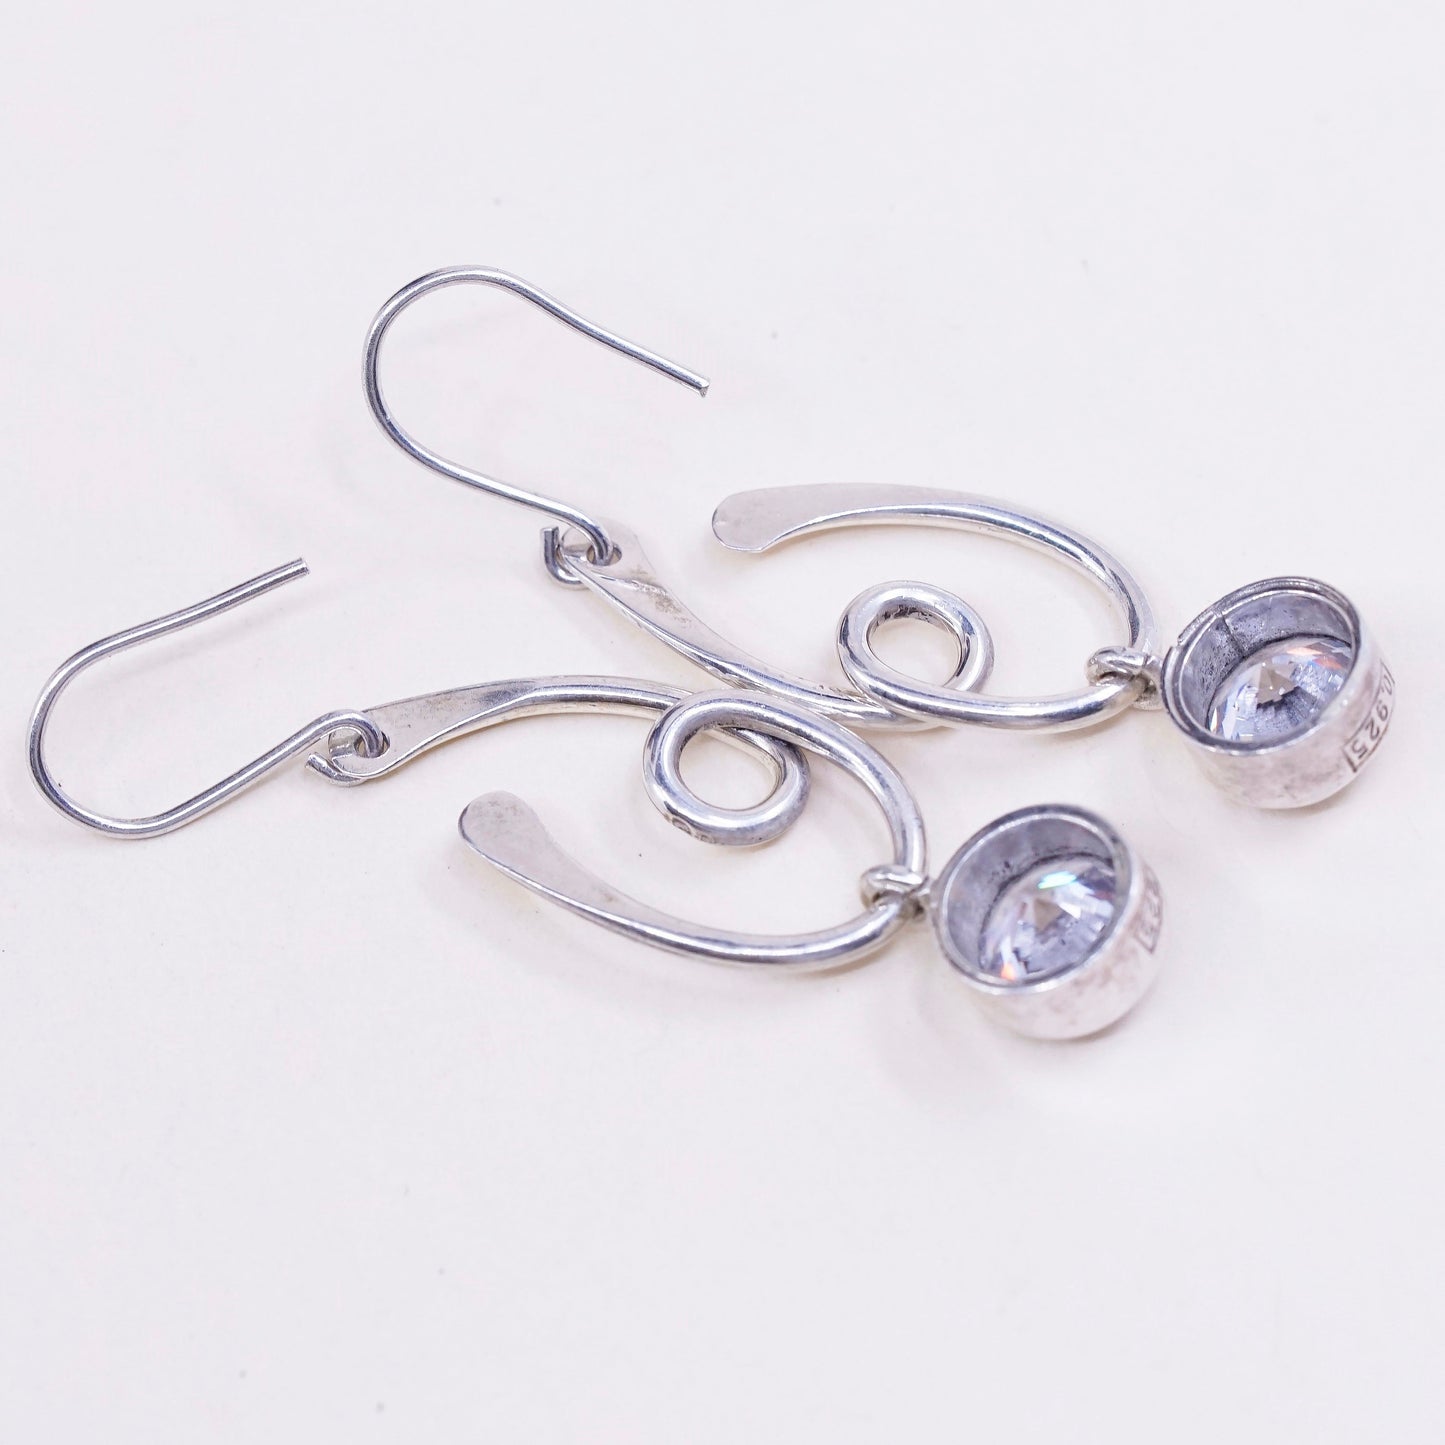 Vintage sterling silver handmade earrings, 925 swirl with round CZ